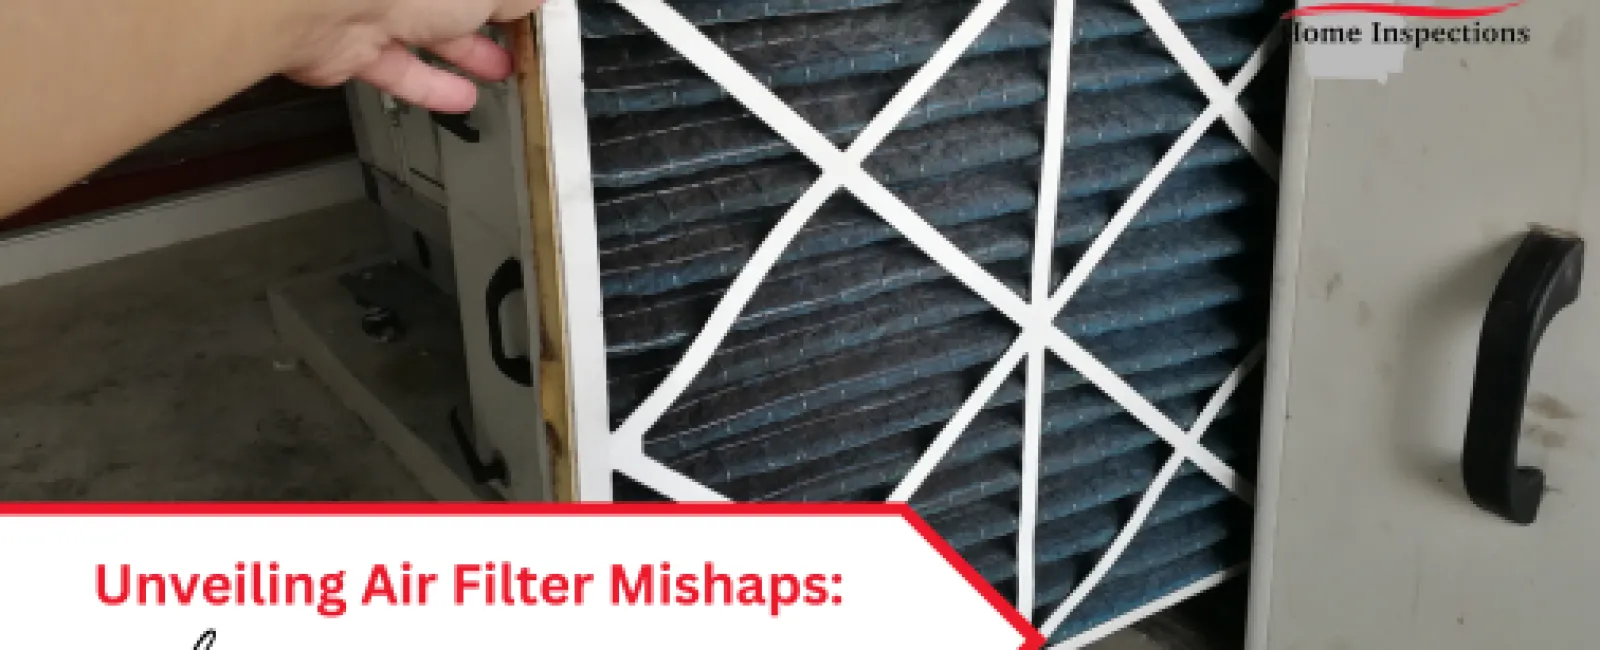 Unveiling Air Filter Mishaps: Insights from an Attic Inspection